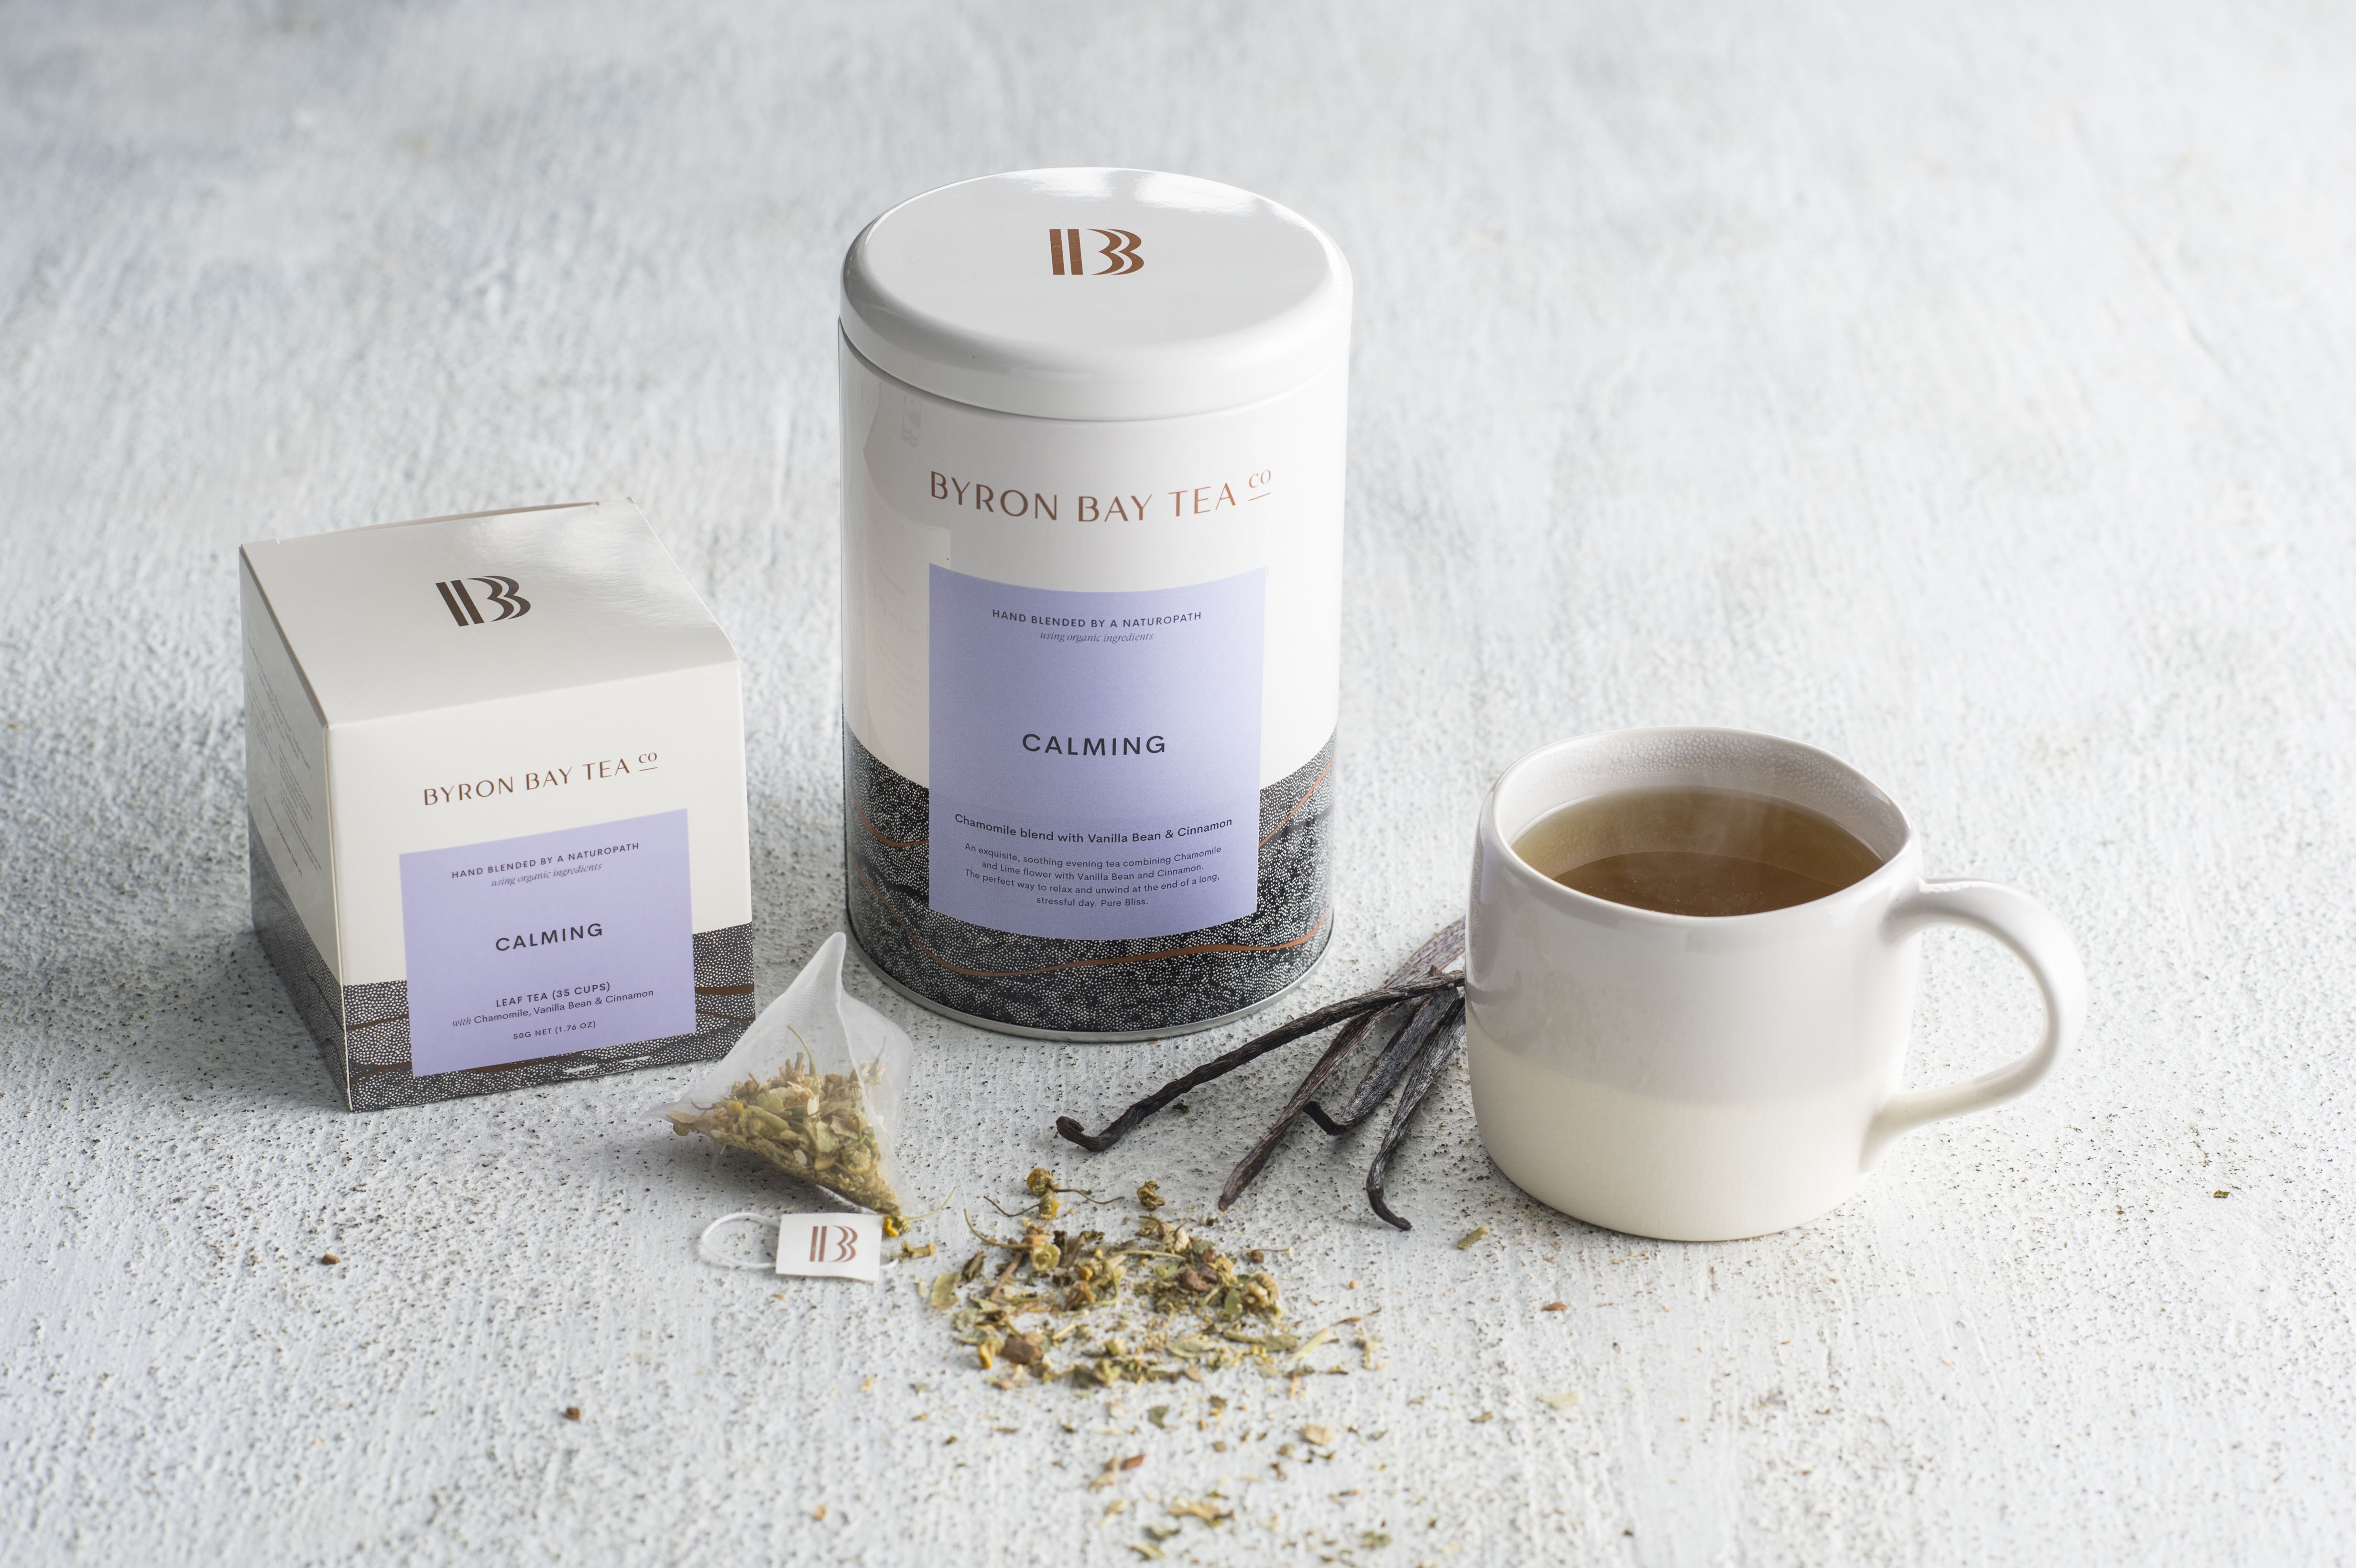 Box and tin of Byron Bay Tea Company calming tea with a teabag and tea leaf in the foreground and a brewed cup of tea in an organic grey cashmere mug next to it with vanilla sticks on a stone bench